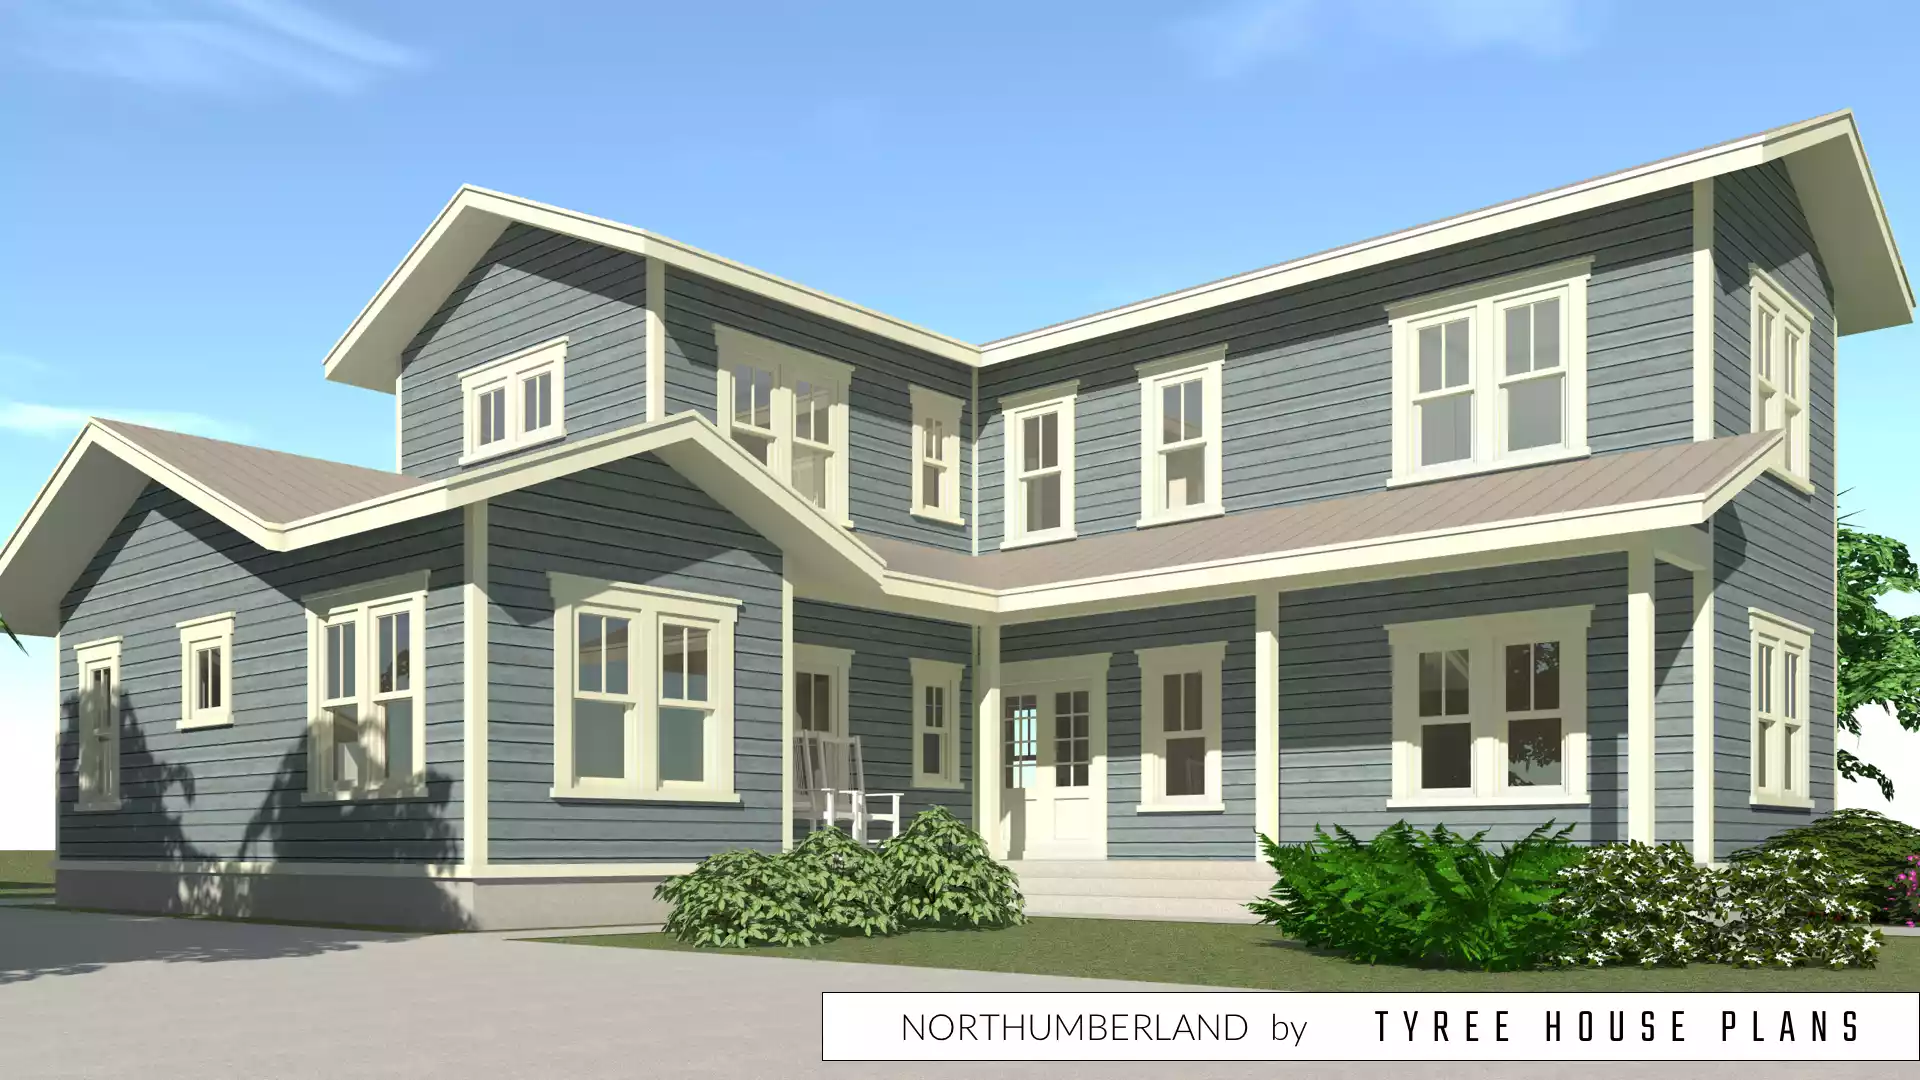 Front view. Northumberland by Tyree House Plans.